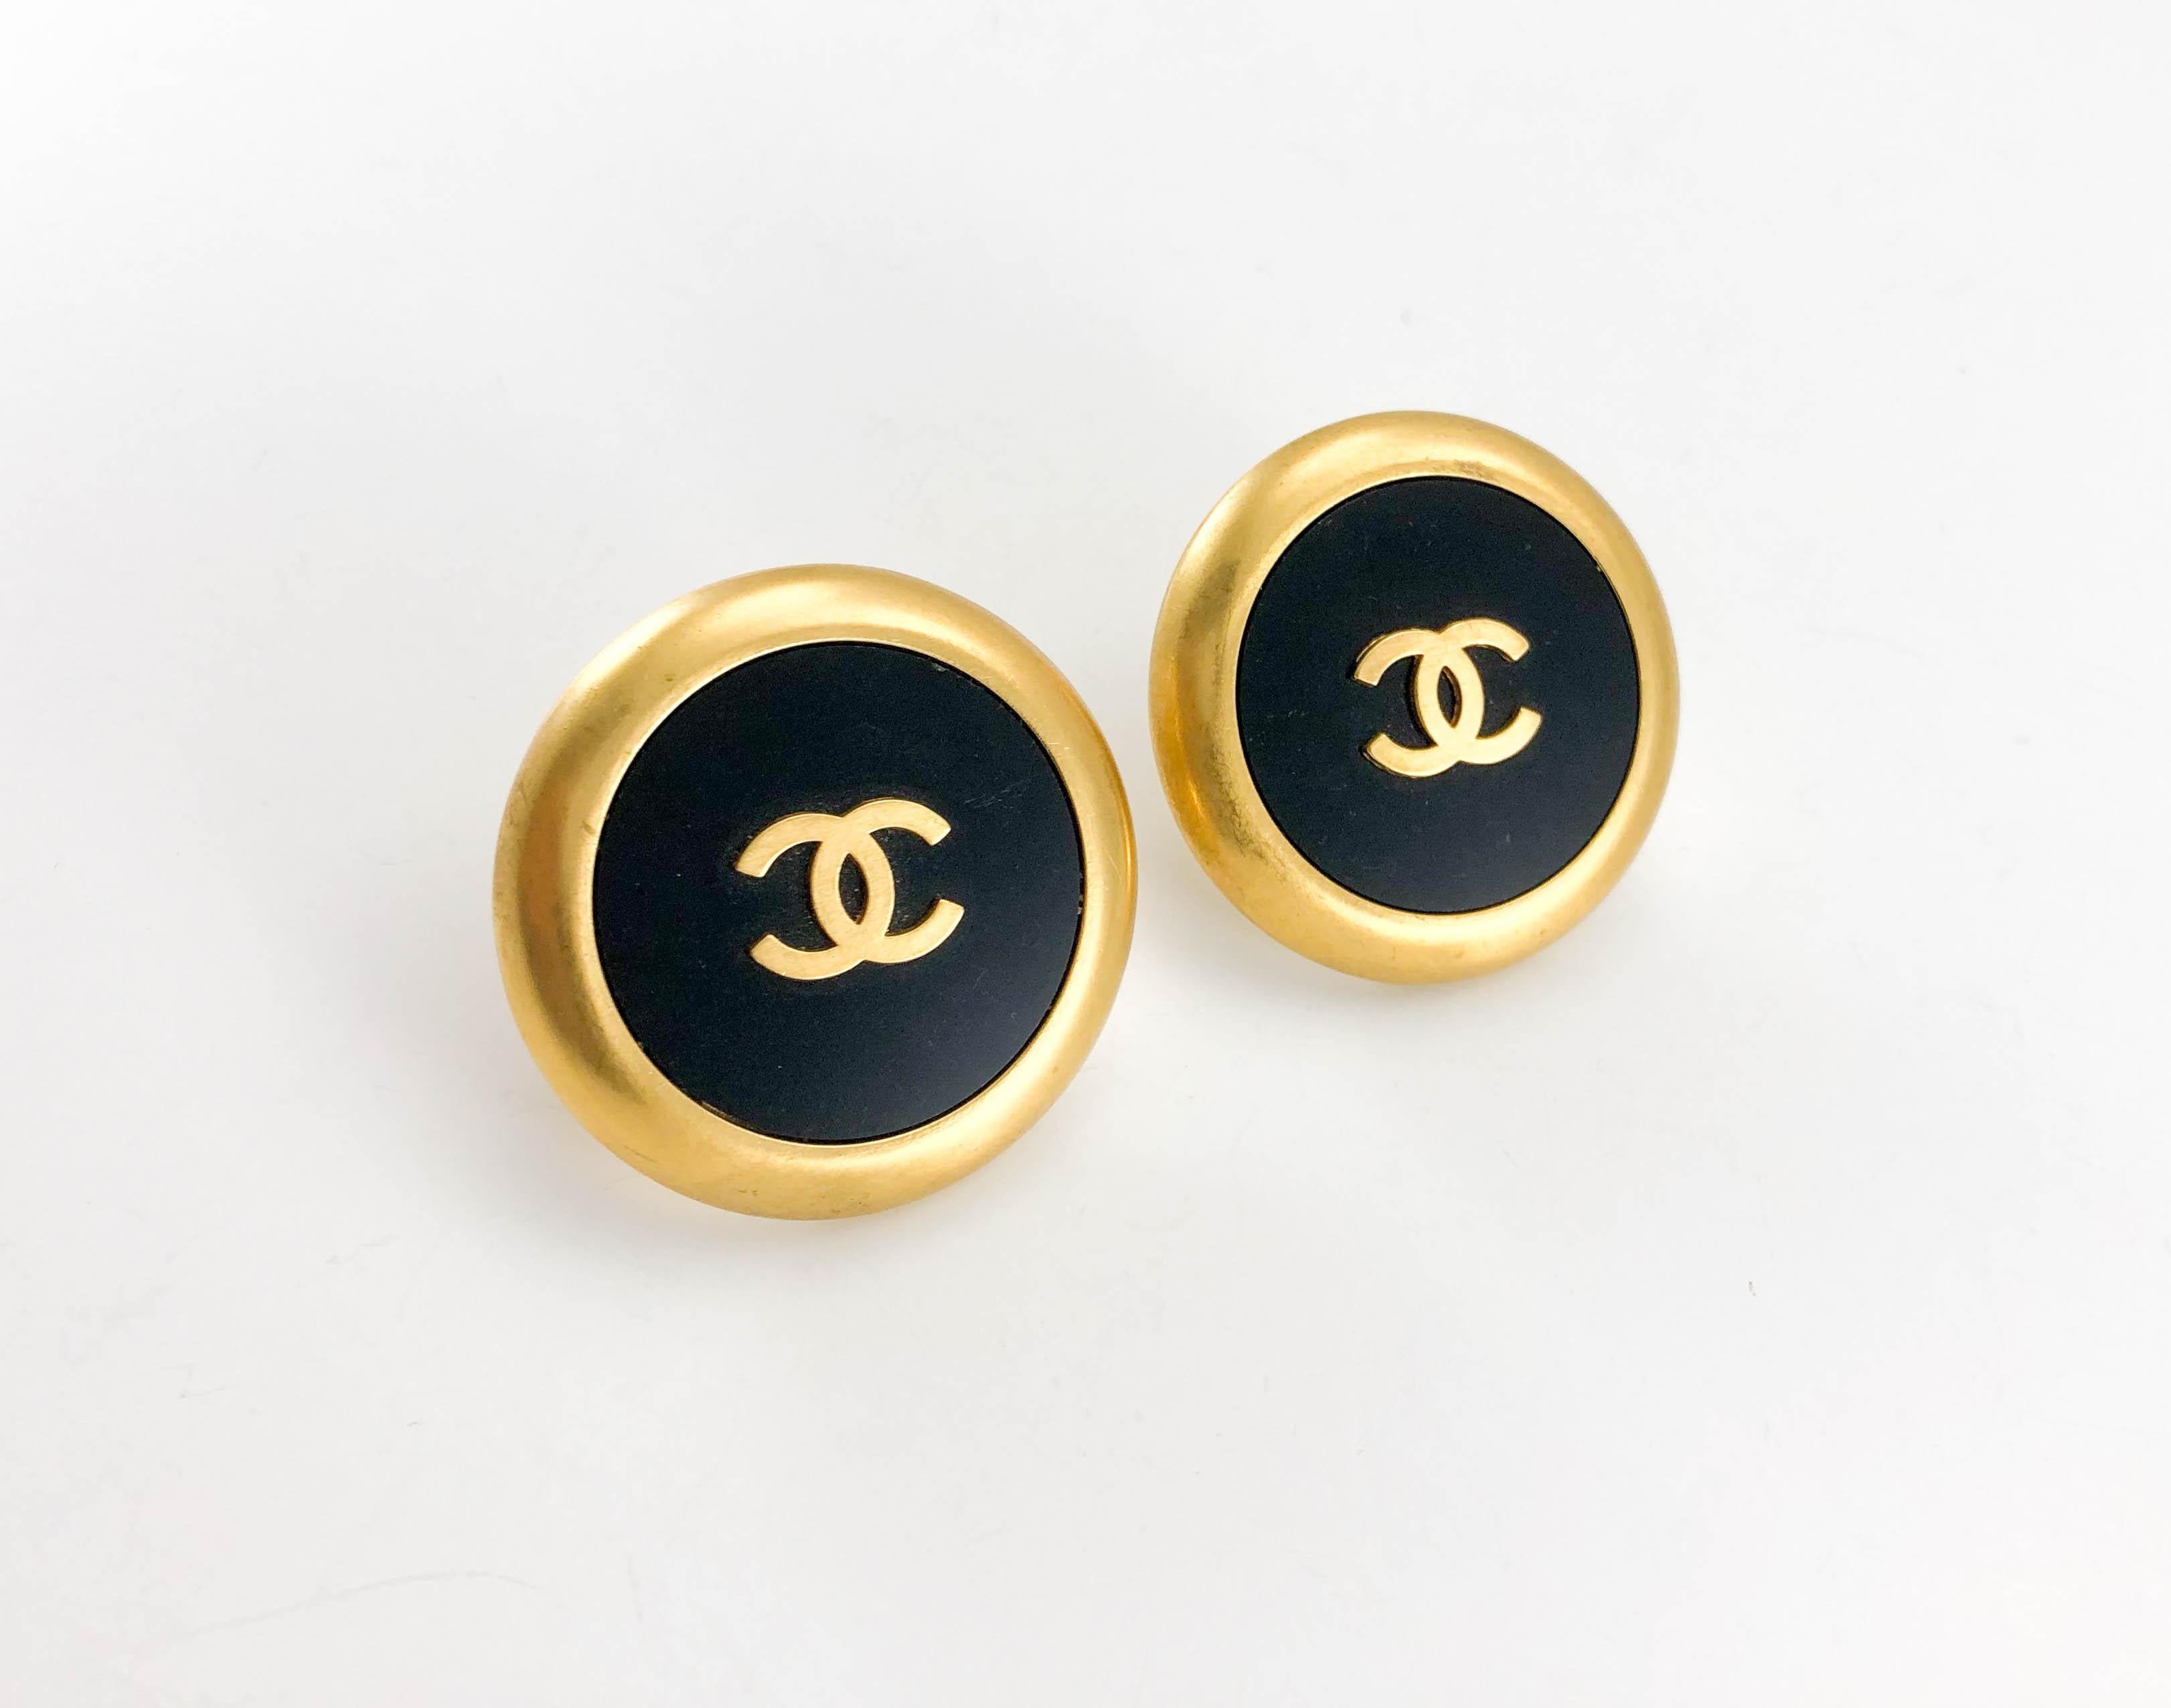 1992 Chanel Large Black And Golden Round Logo Earrings For Sale 4